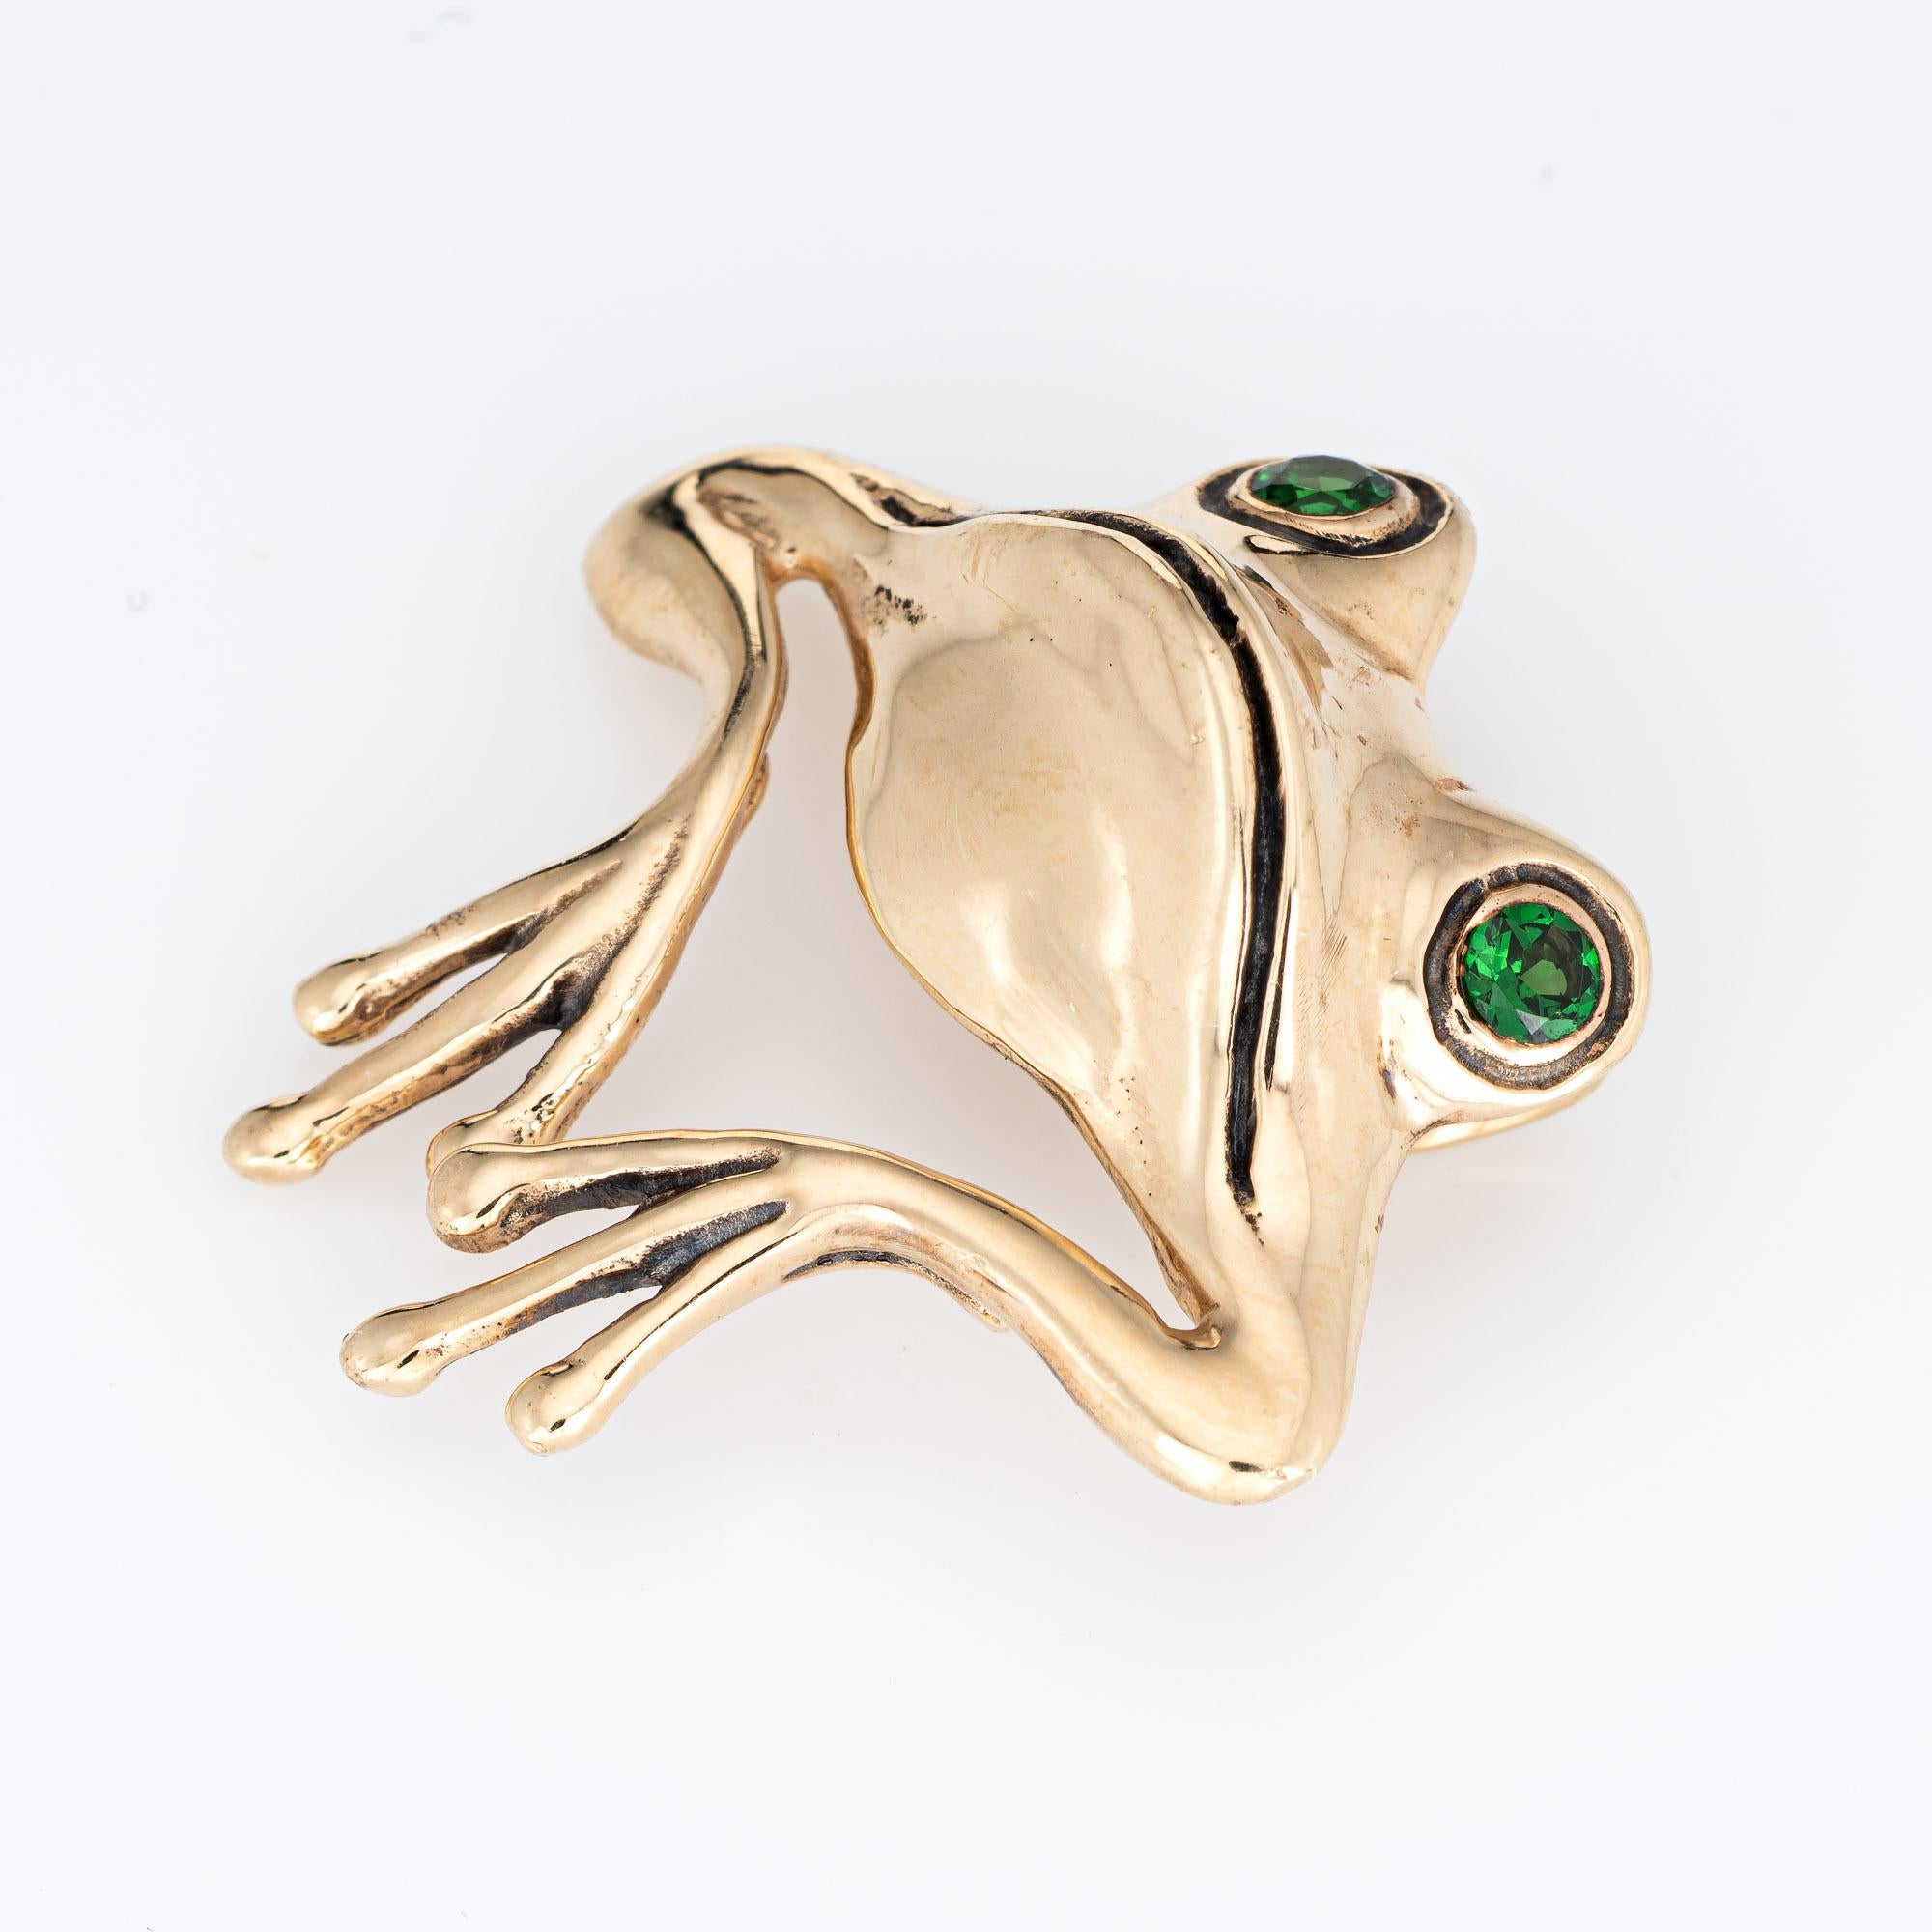 Finely detailed vintage frog pendant crafted in 14k yellow gold (circa 1960s to 1970s).  

Two estimated 0.10 carat tsavorite garnets are set into the eyes (0.20 carats total estimated weight). 

The charming & whimsical frog sits perched with